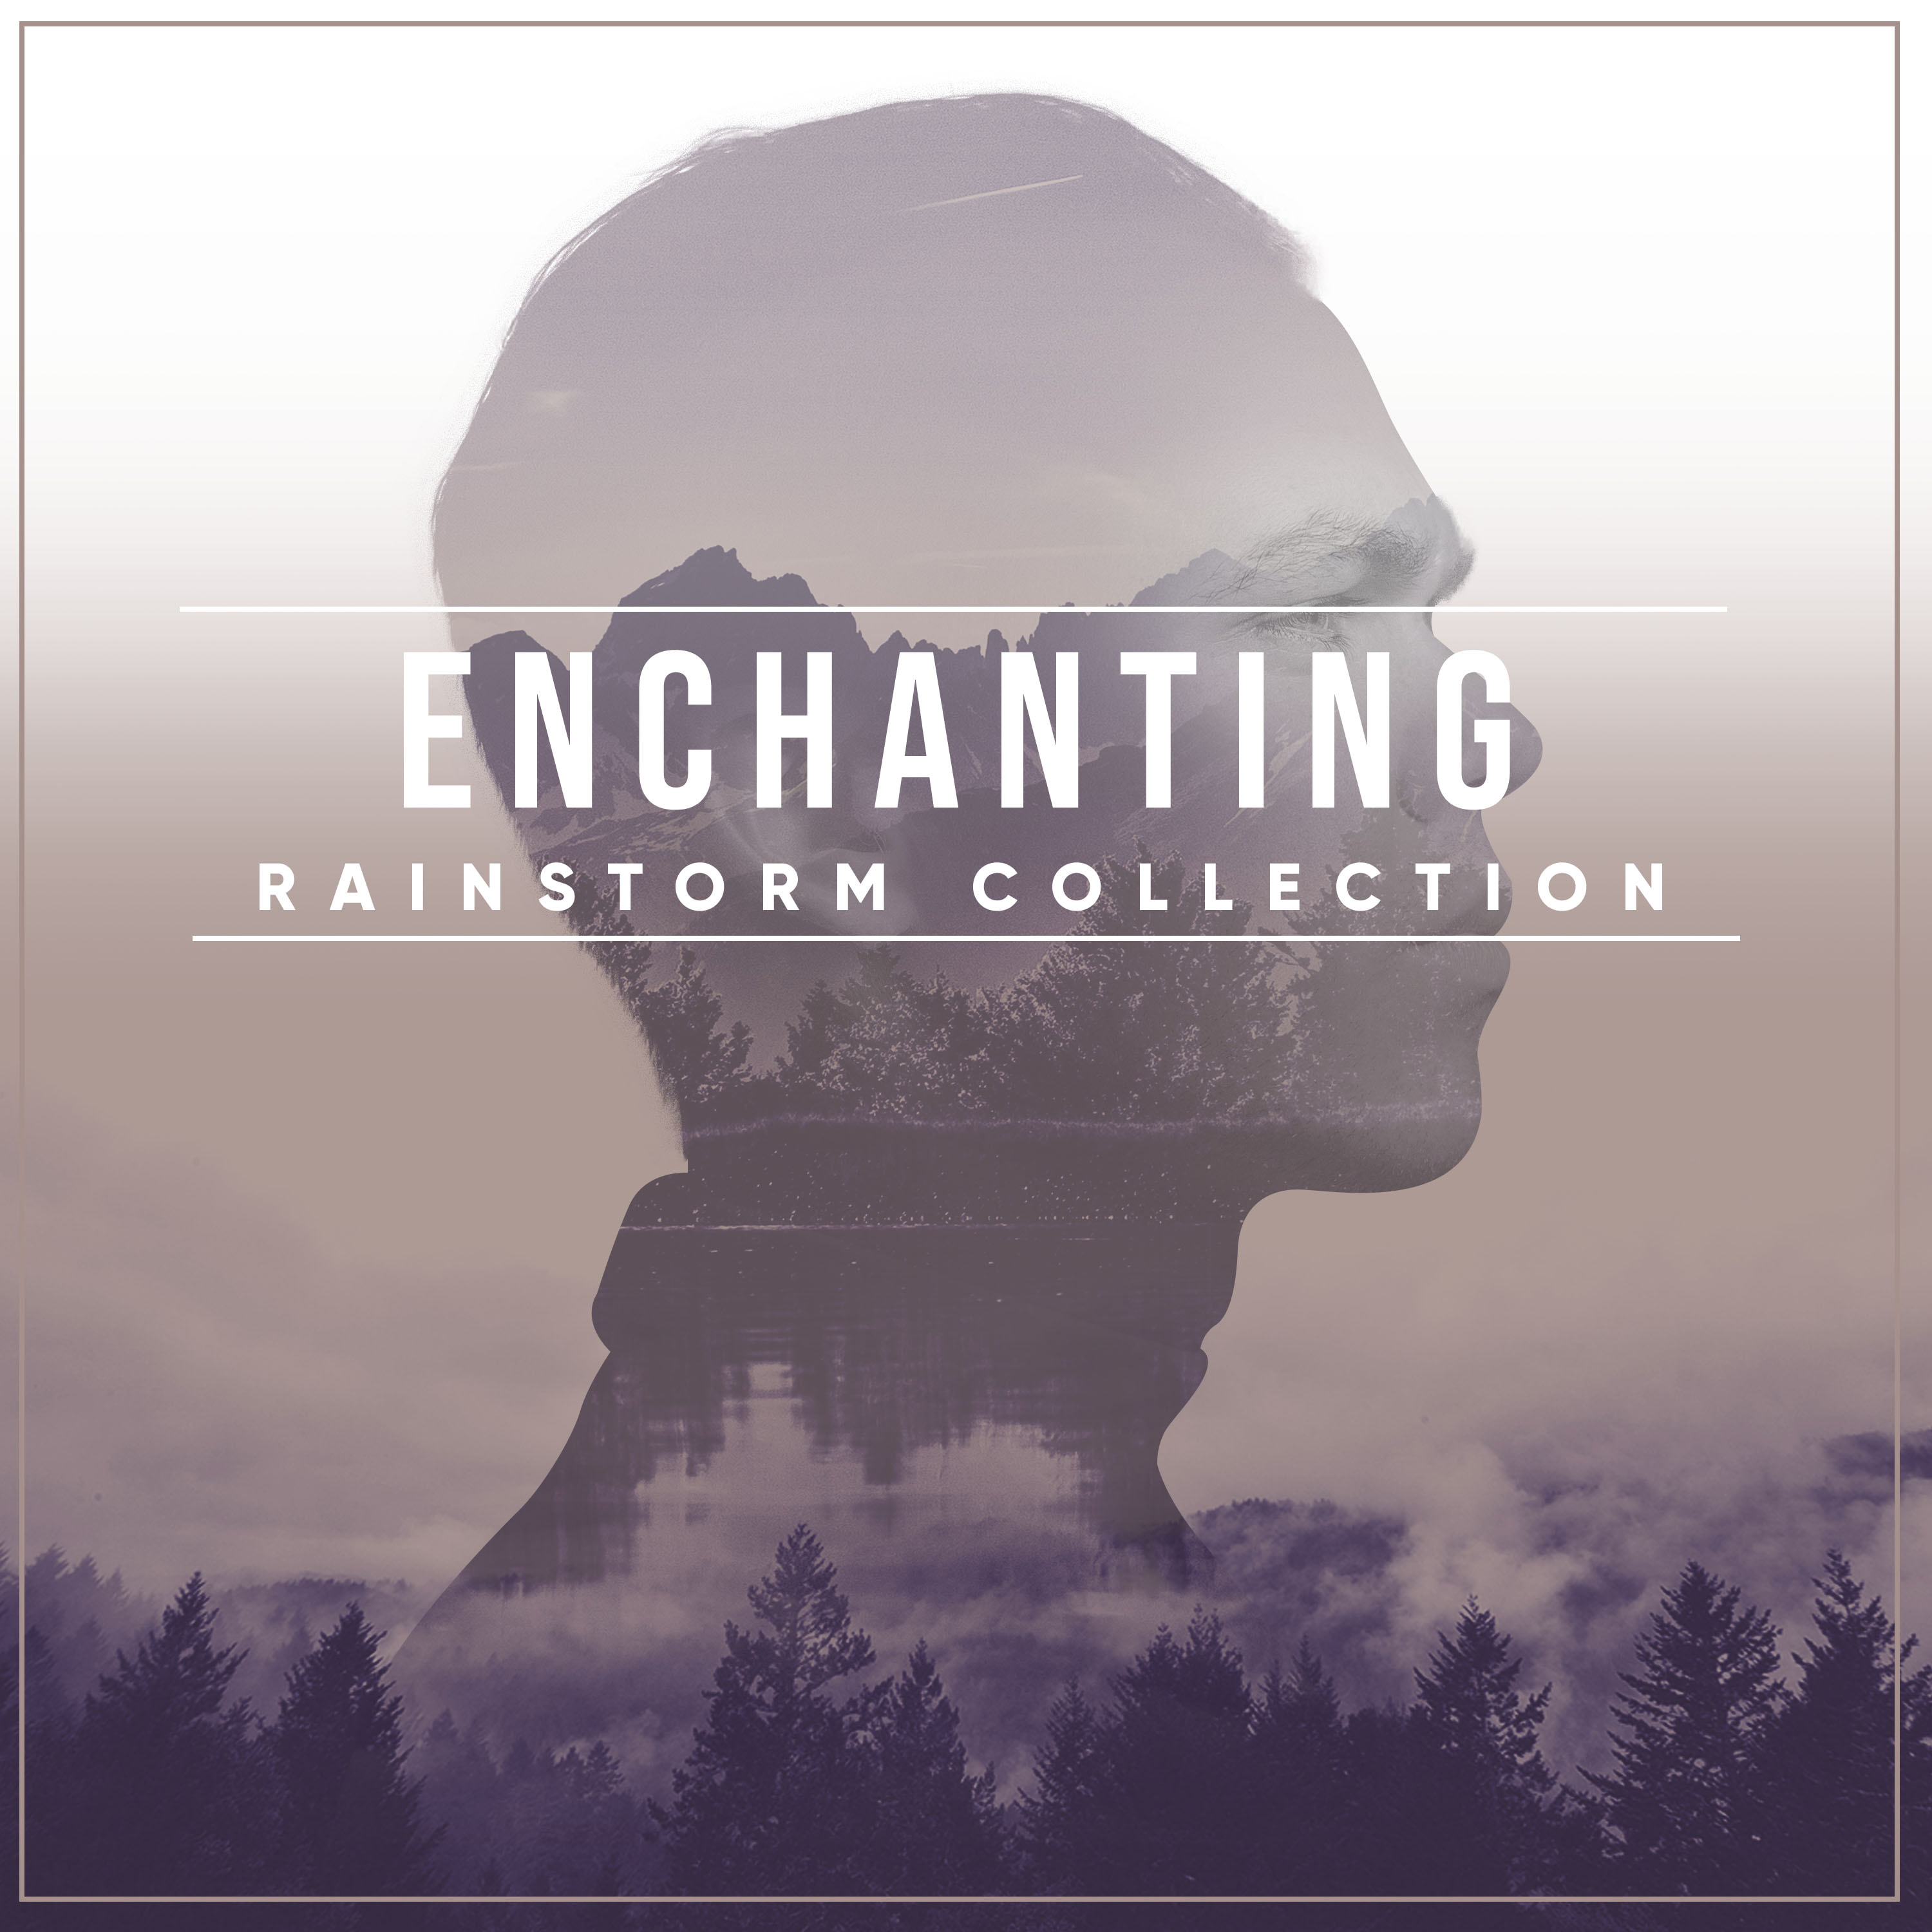 #1 Hour of Enchanting Rainstorm Collection from Nature